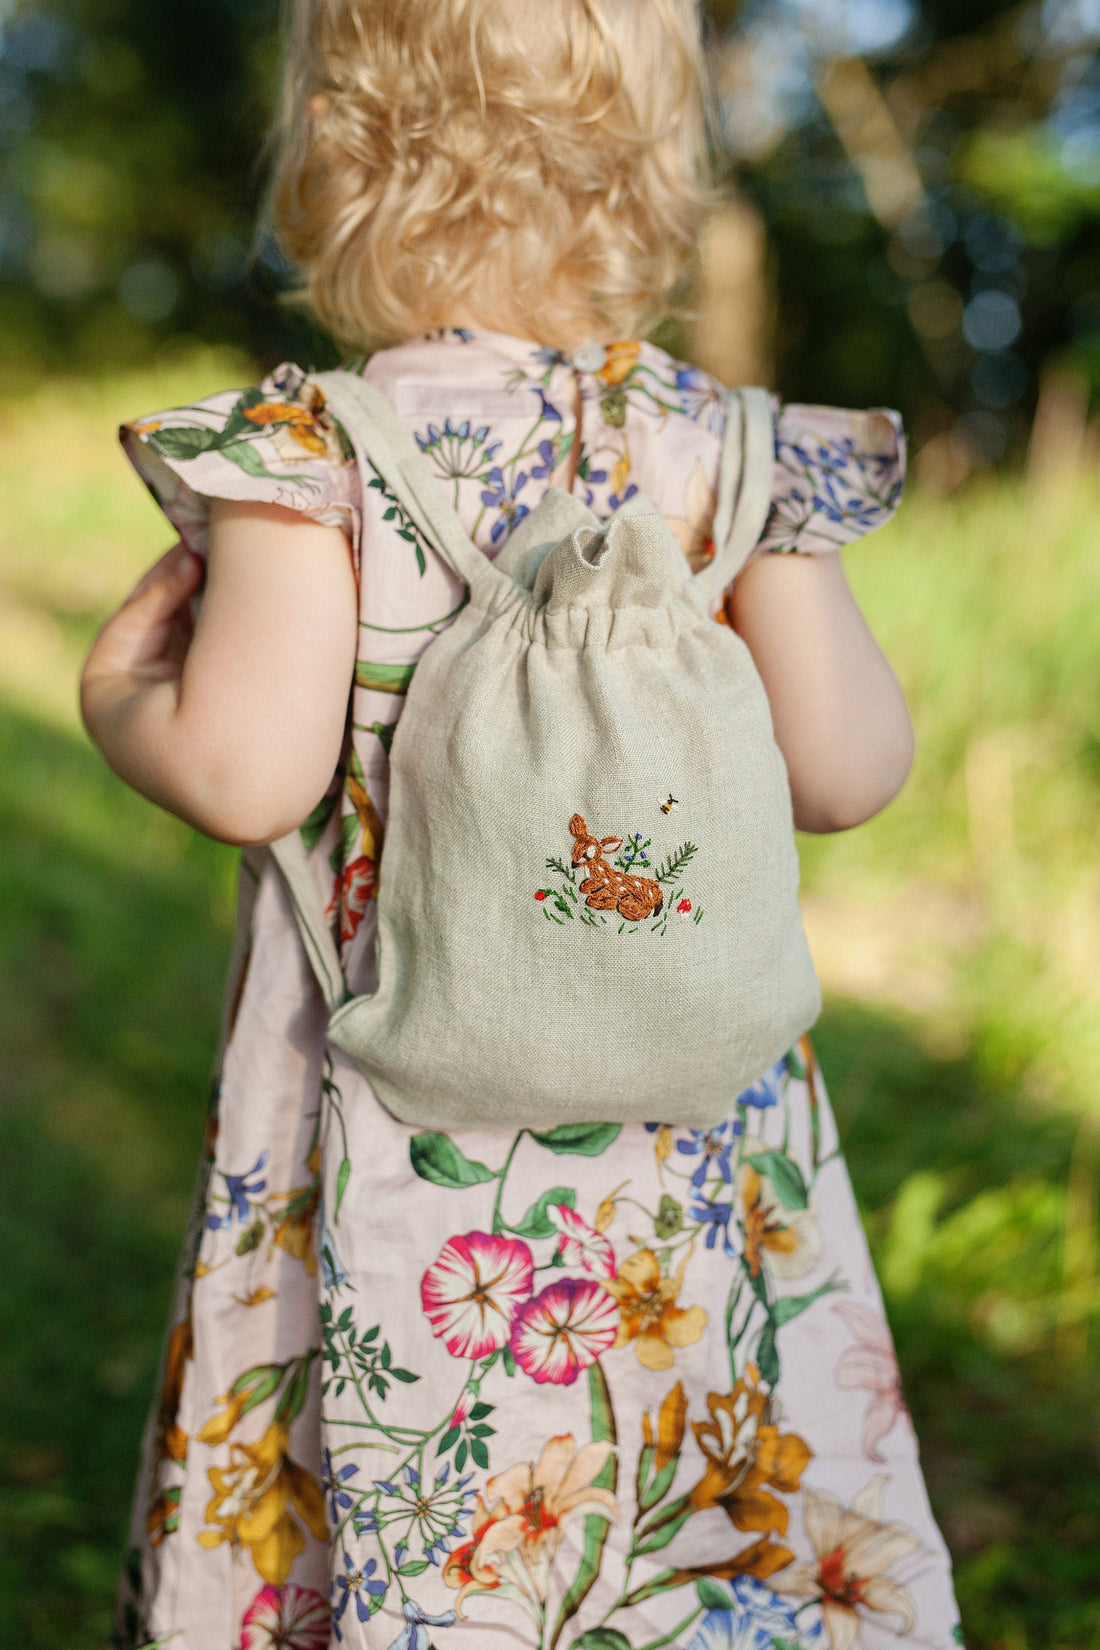 Fawn in the Meadow Backpack